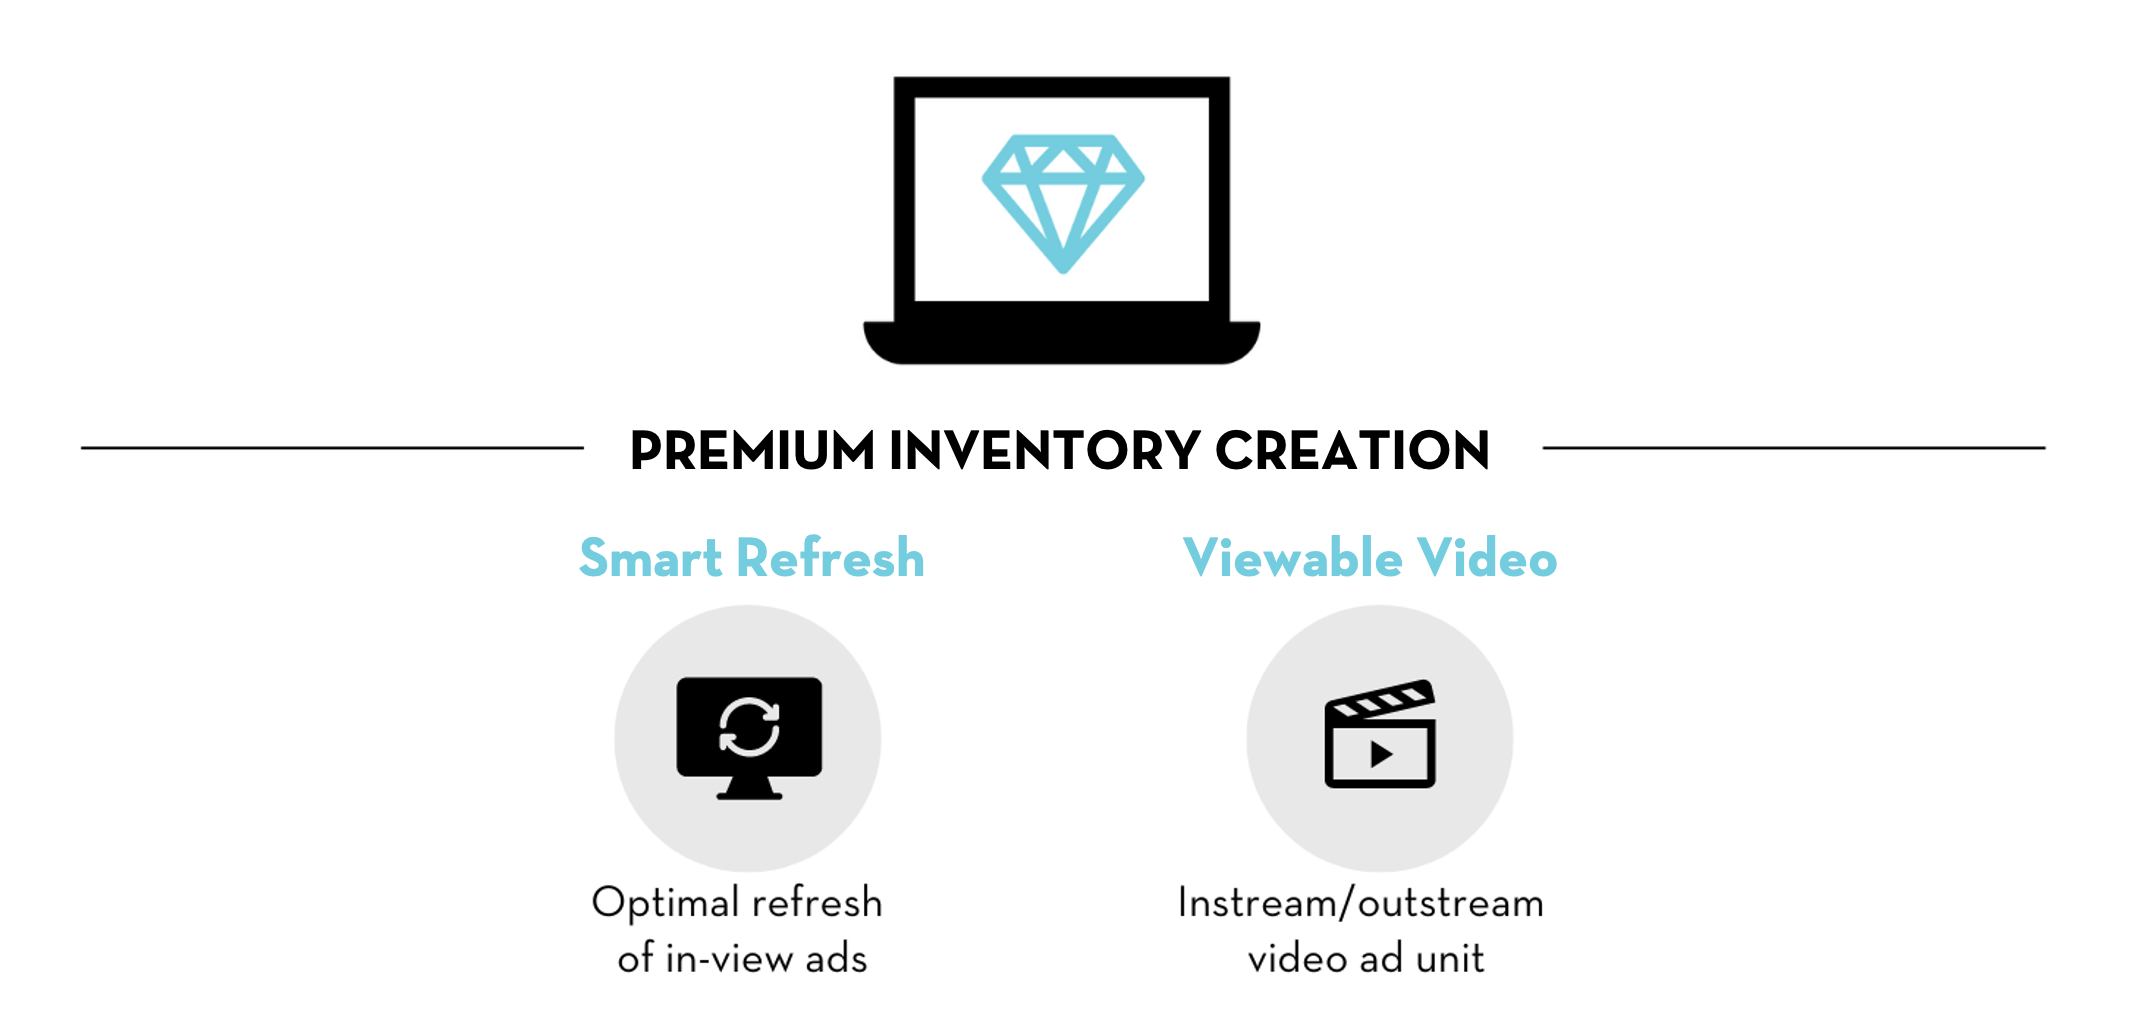 Premium Inventory Creation. 1. Smart Refresh: Optimal refresh of in-view ads 2. Viewable Video: Instream video ad unit.